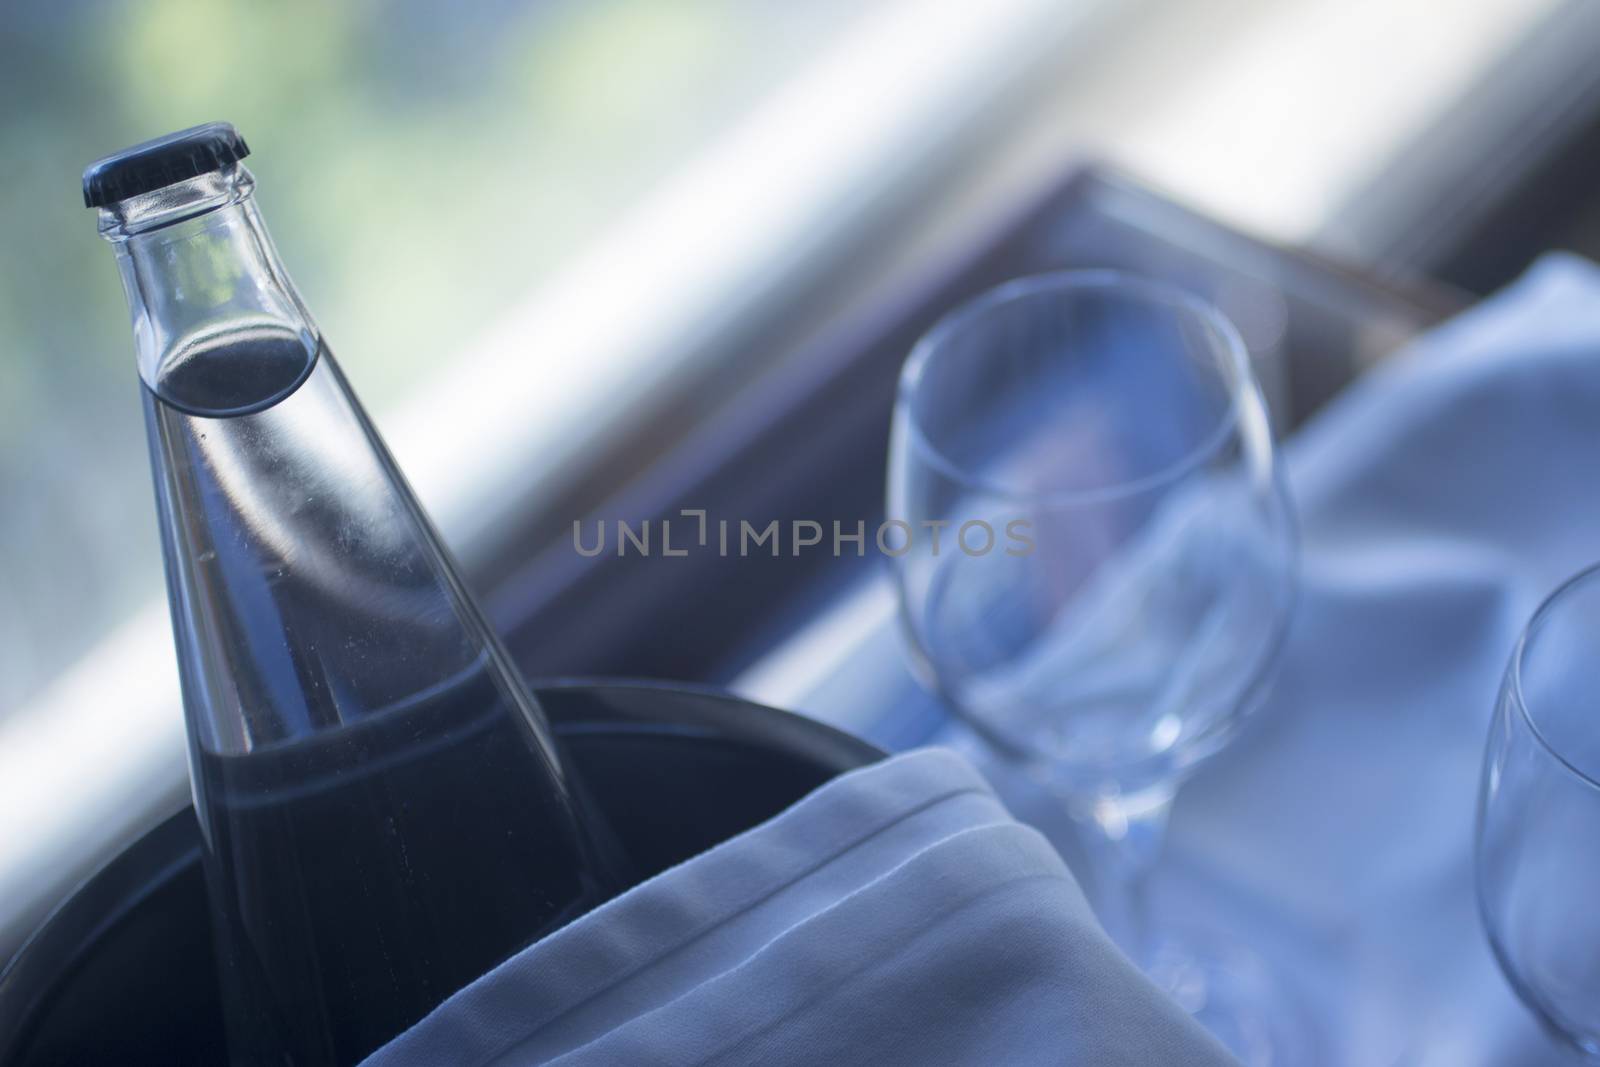 Artistic still life photo of two glasses and bottle of water in metal ice bucket with cloth covering on a glass table in room with window behind in soft evening purple blue color light with out of focus in background.